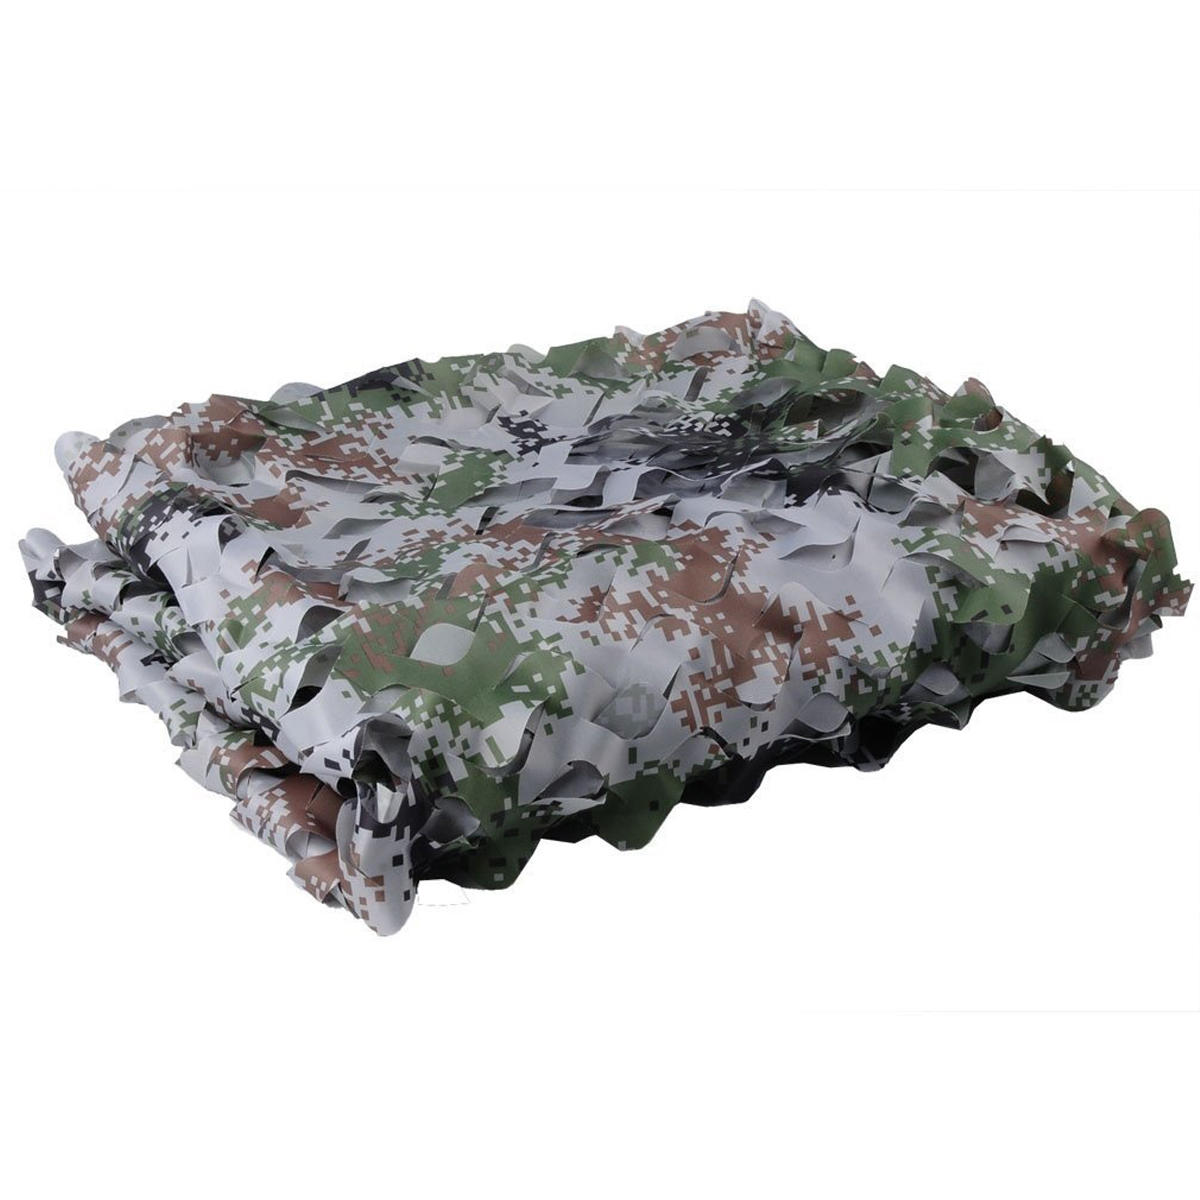 Outdoor Camping Woodland Leaves Digital Camouflage Net Tactical Double Layer Netting Web